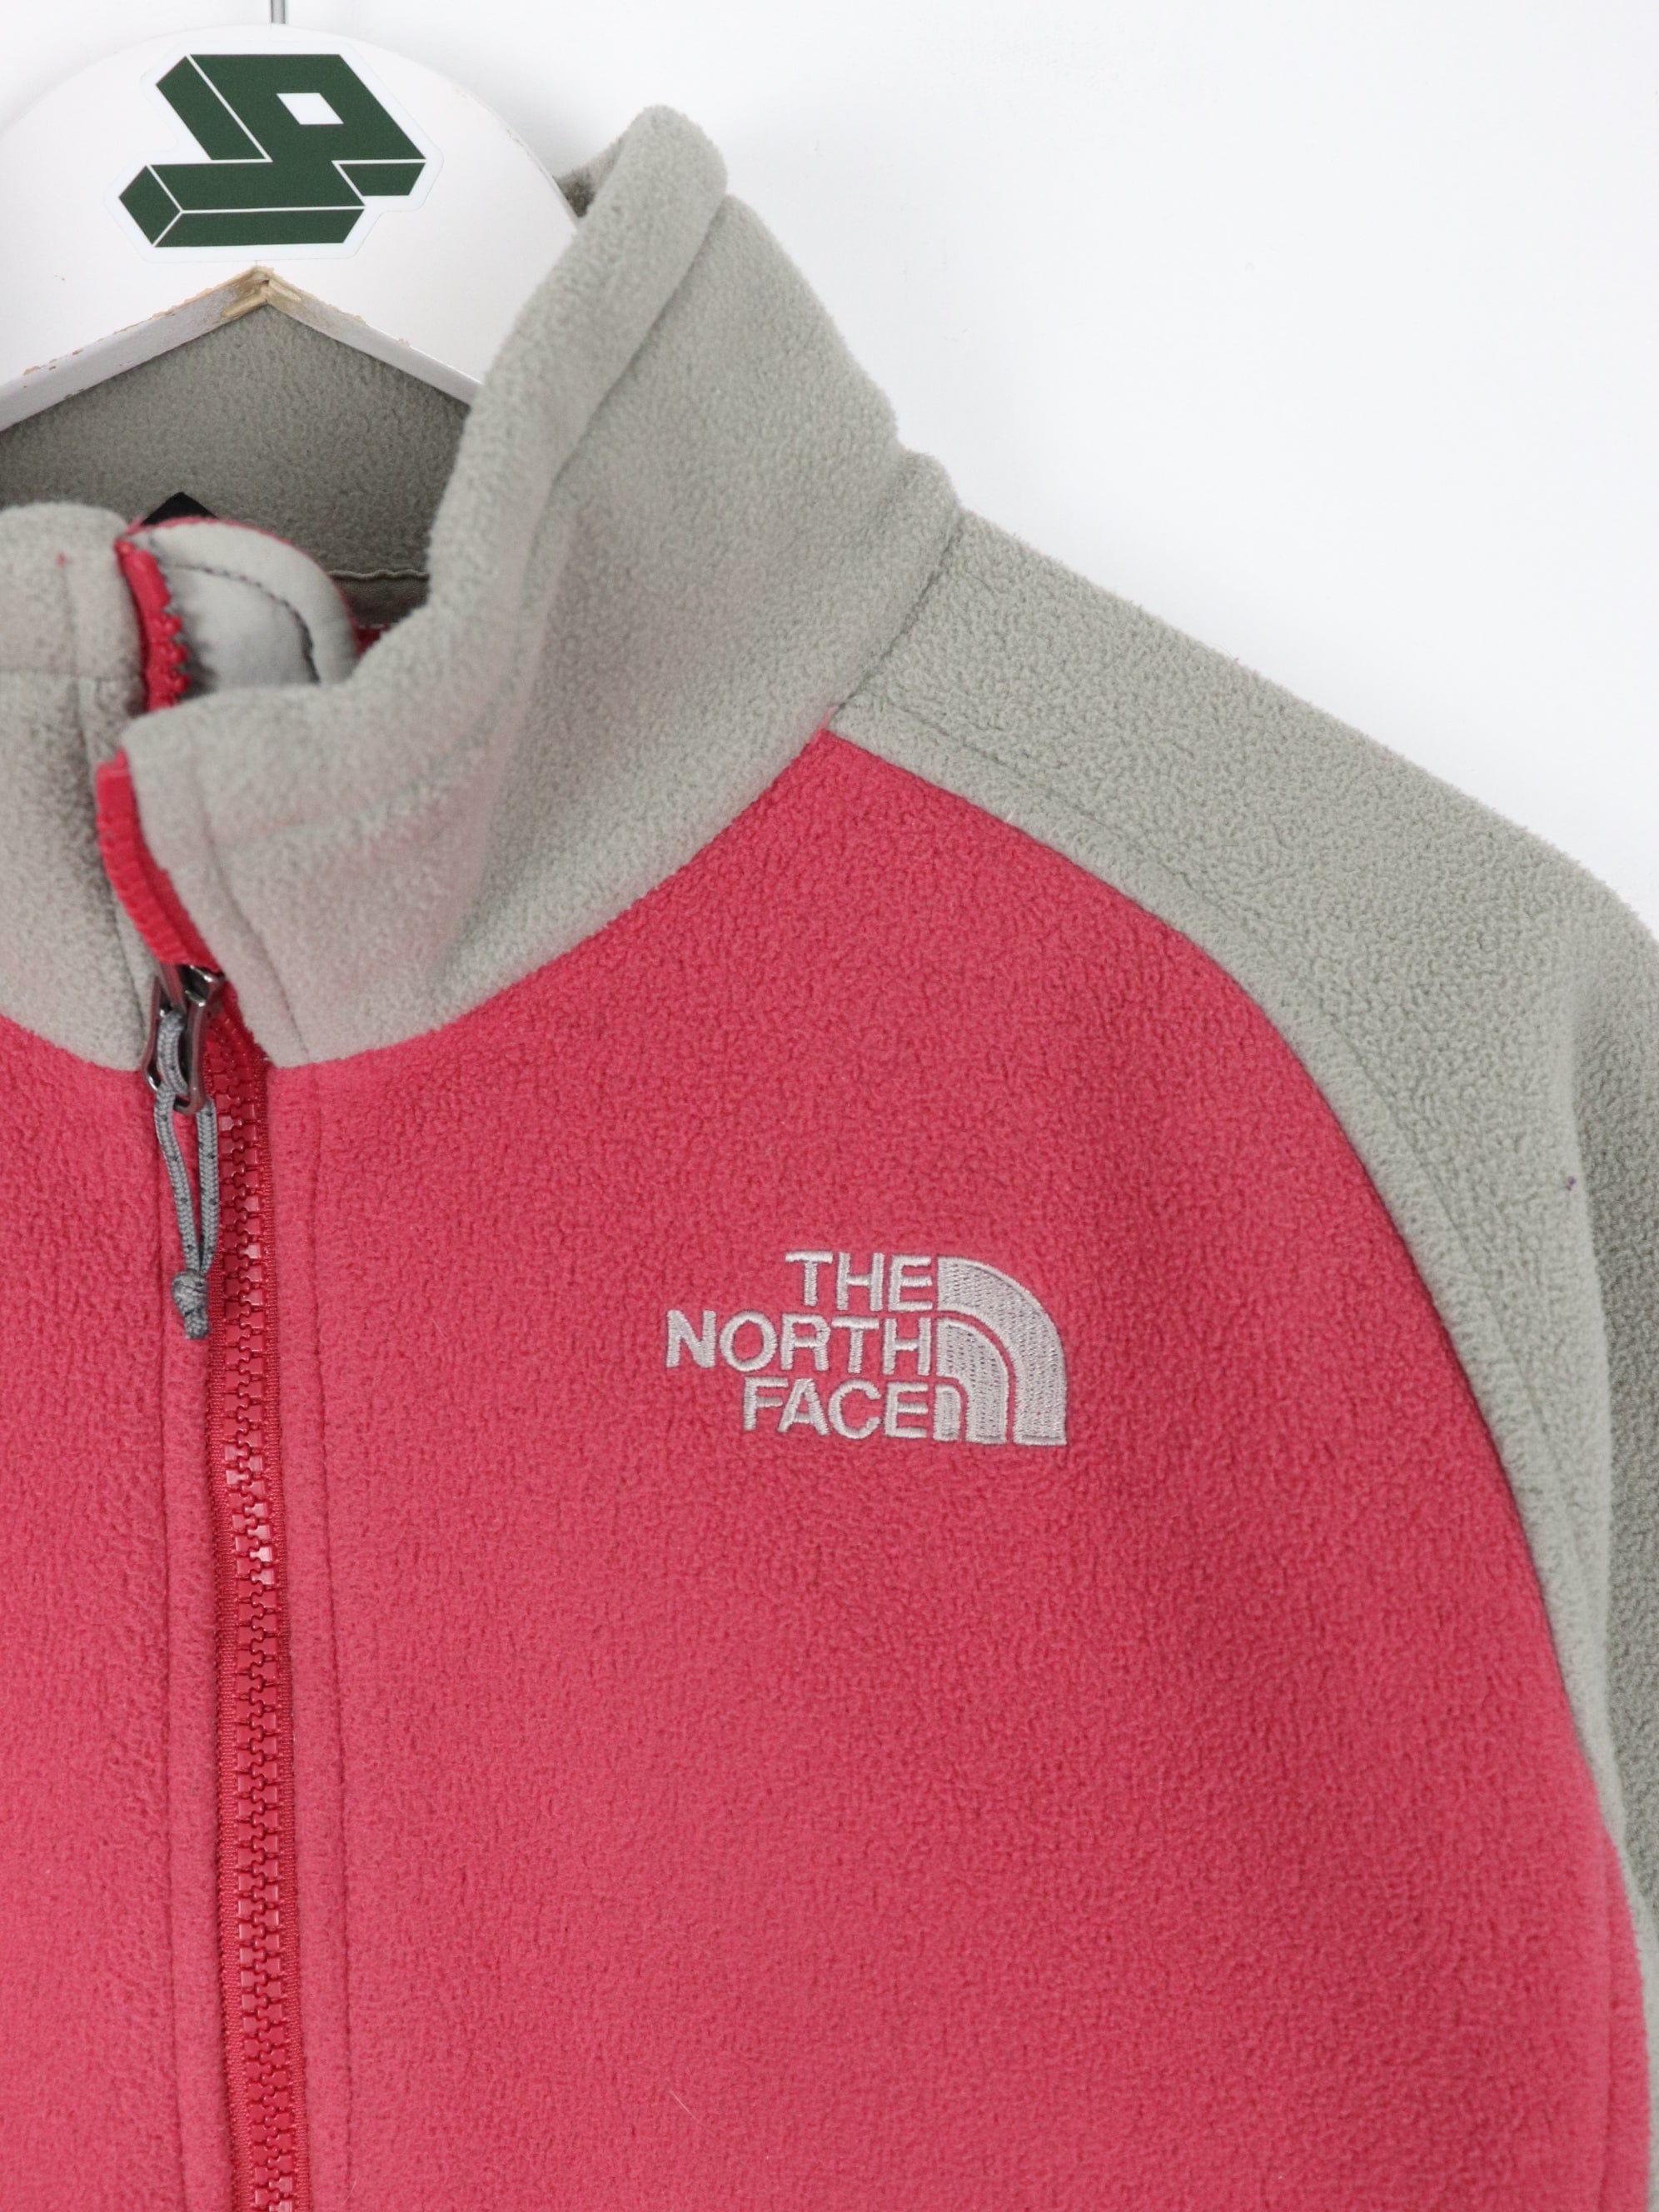 The North Face Sweater Womens Large Red Grey Fleece Full ZIp